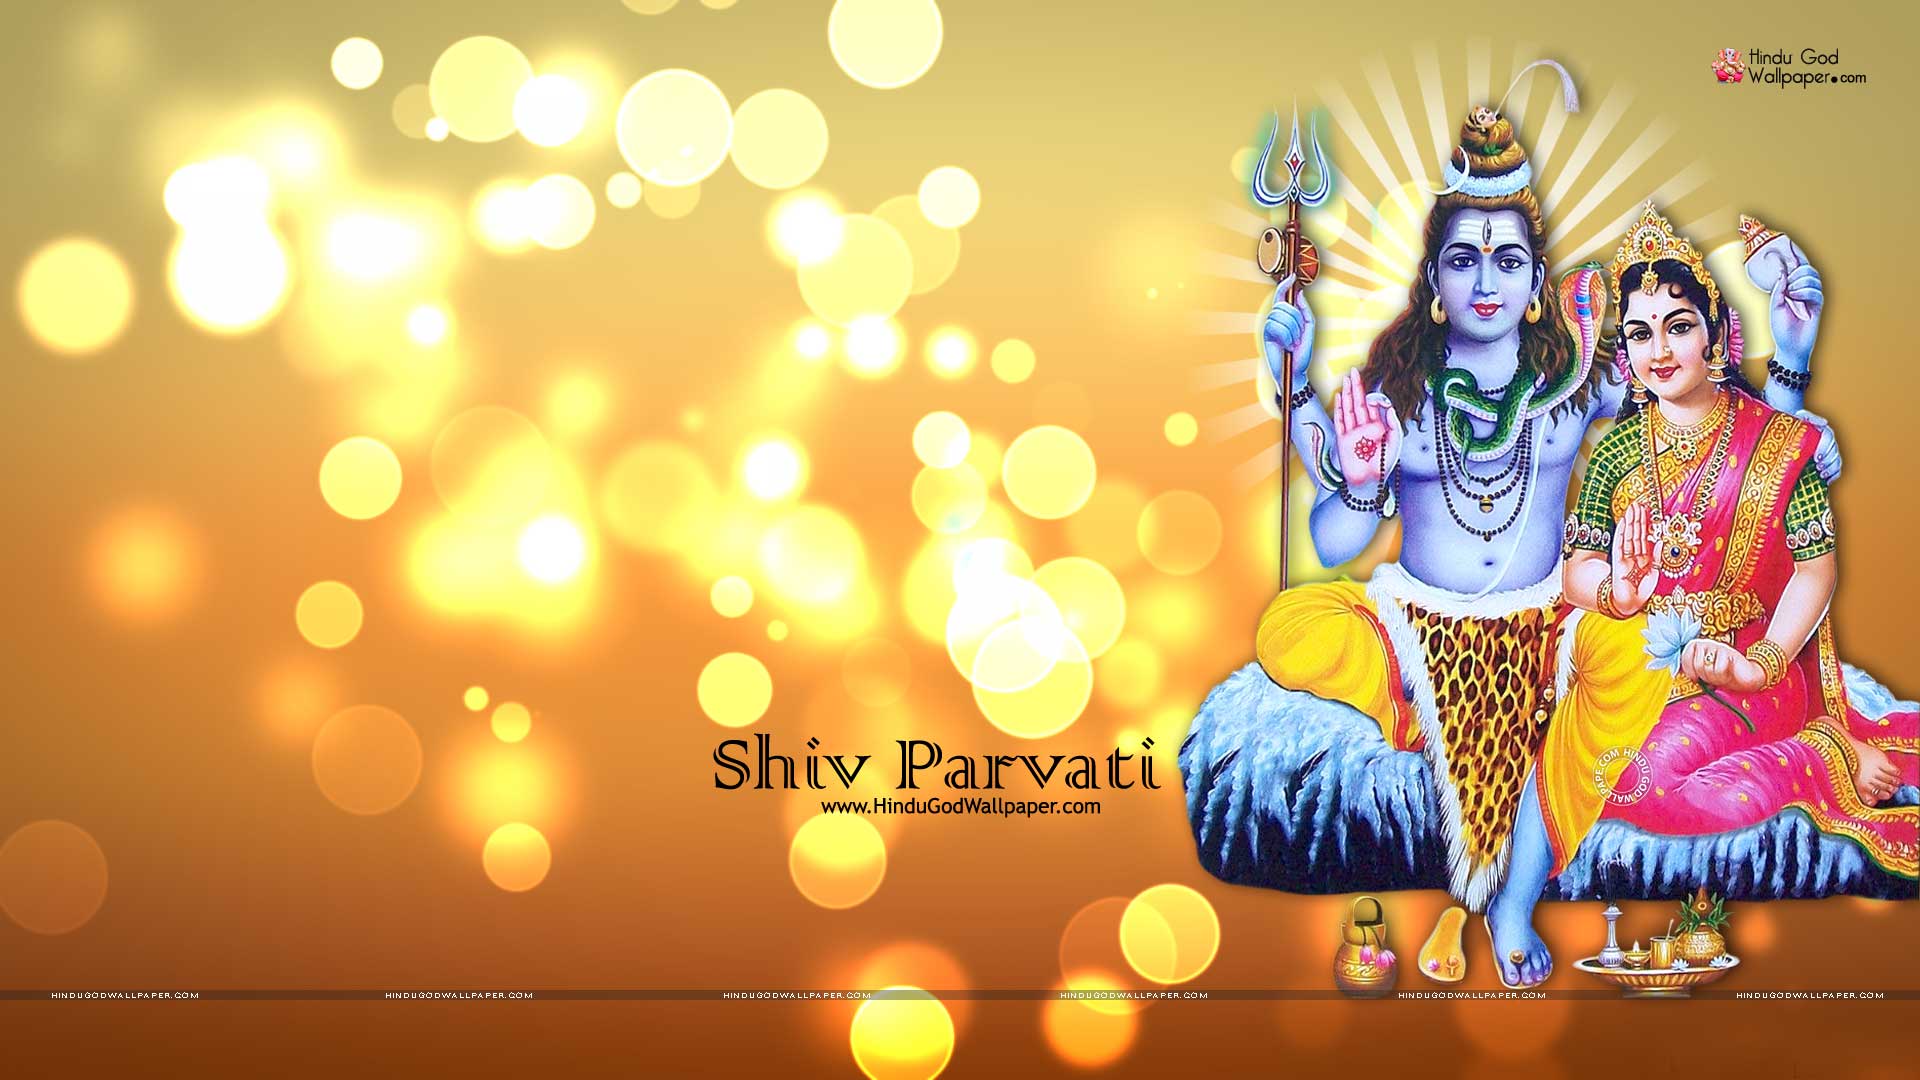 Shiv Parvati Wallpapers, HD Image, Photos, Pictures Free Download